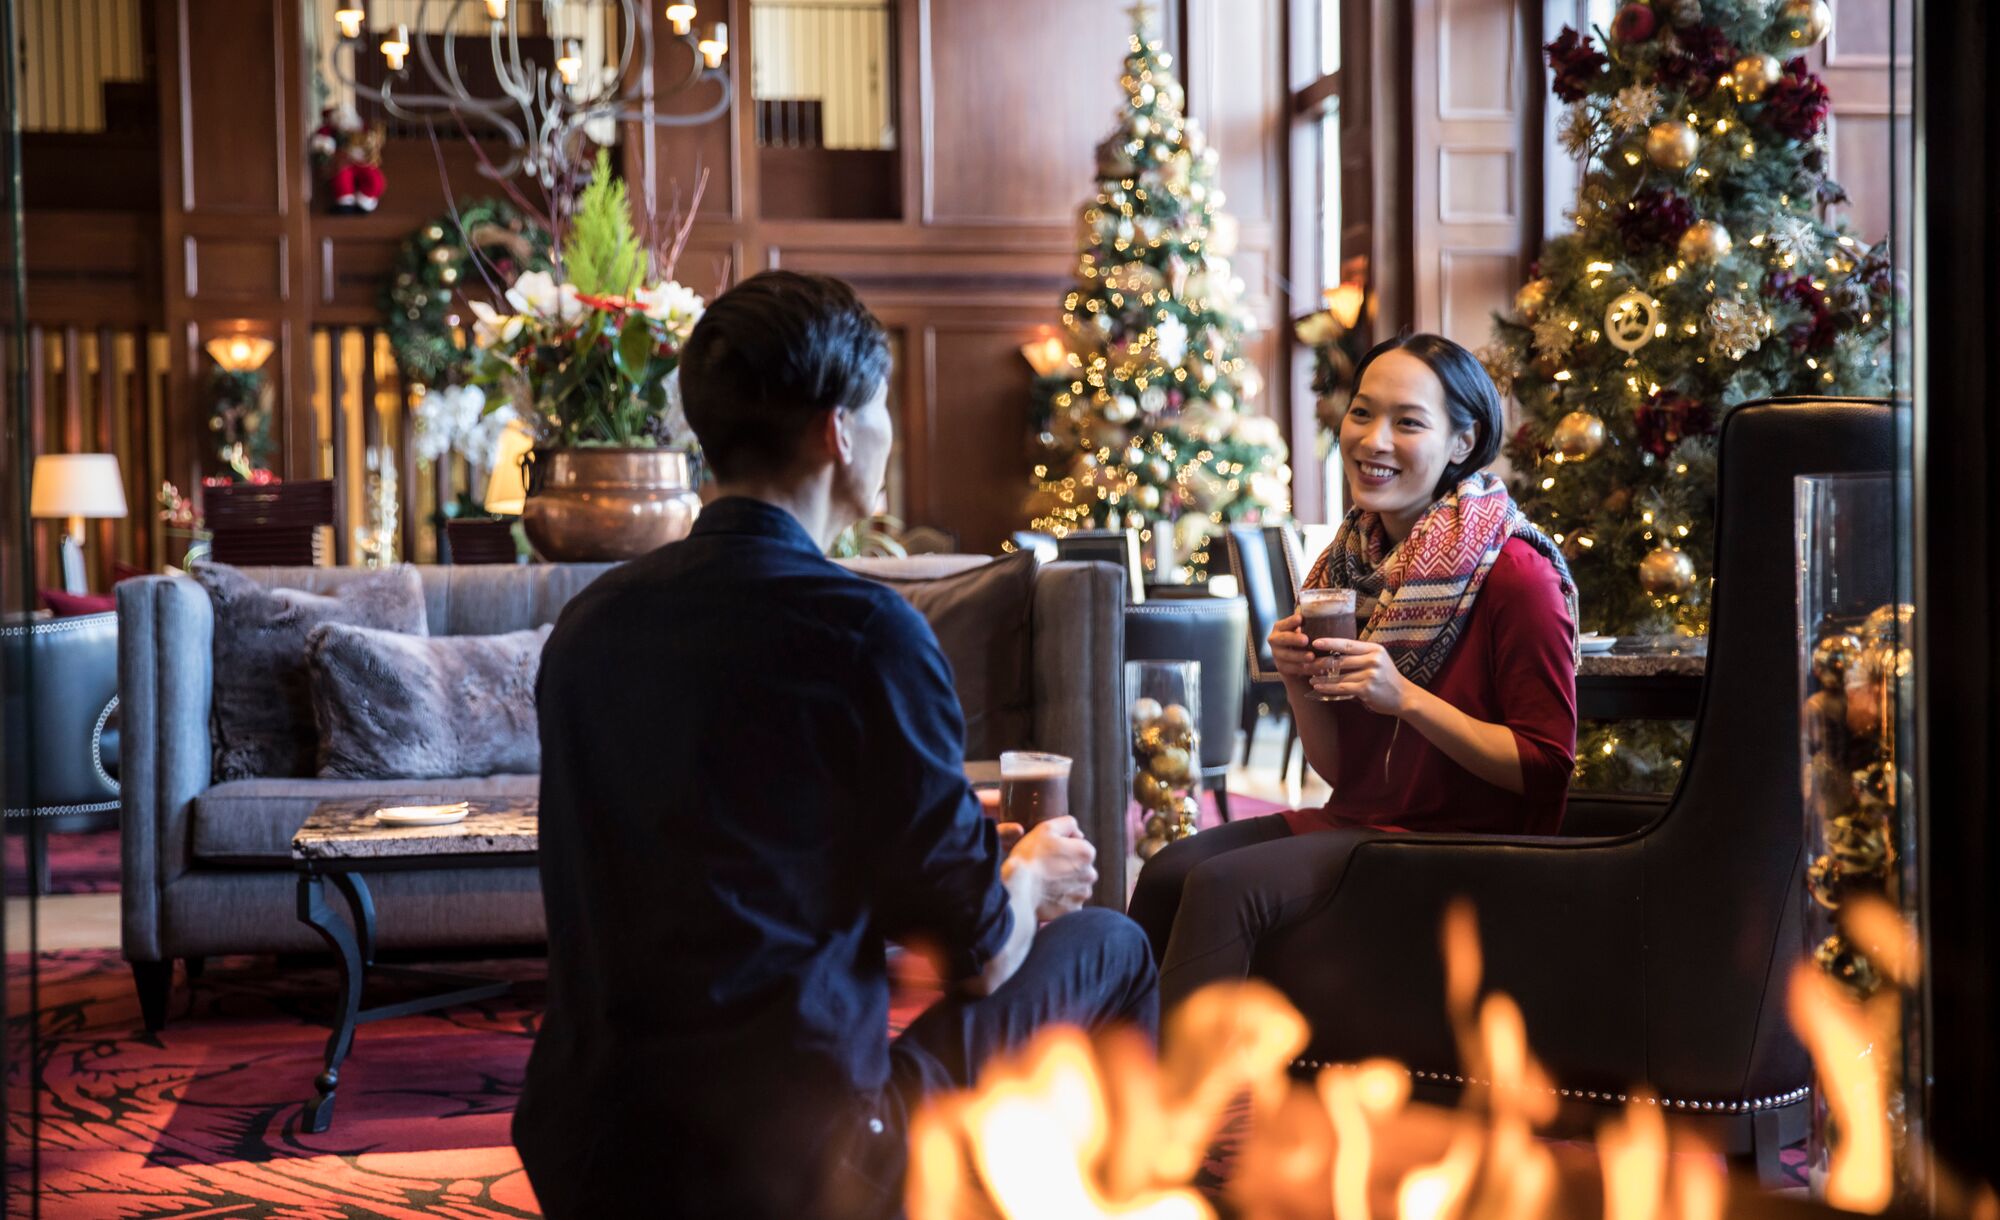 A couple enjoy hot chocolate sitting by a fire place with Christmas trees behind them at the Rimrock Hotel in Banff National Park.